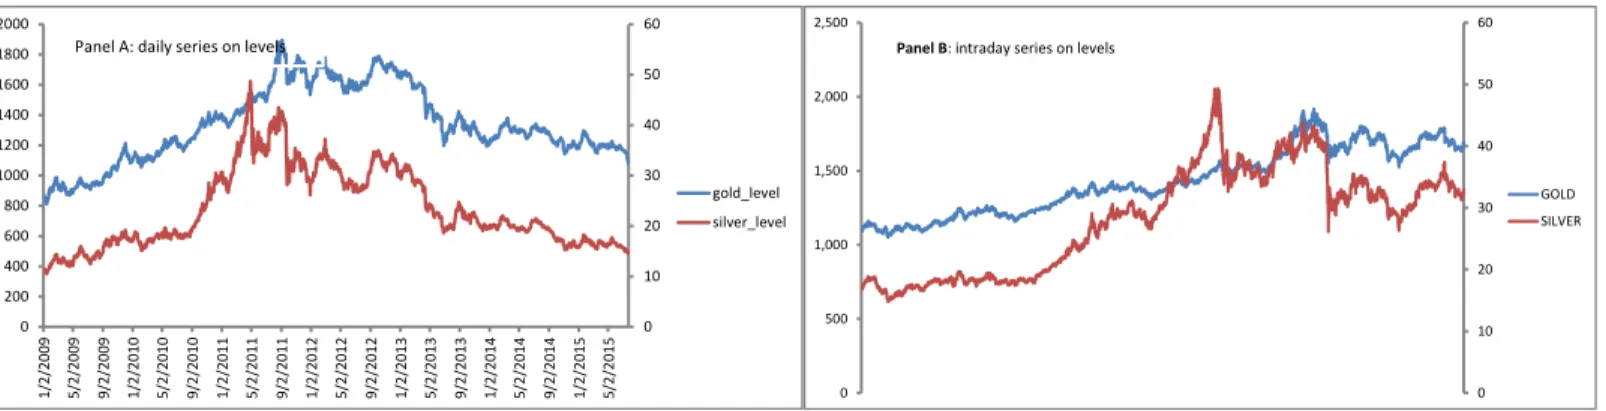 Figure 1. Daily (Panel A) and Intraday (Panel B) Gold and Silver prices on level    